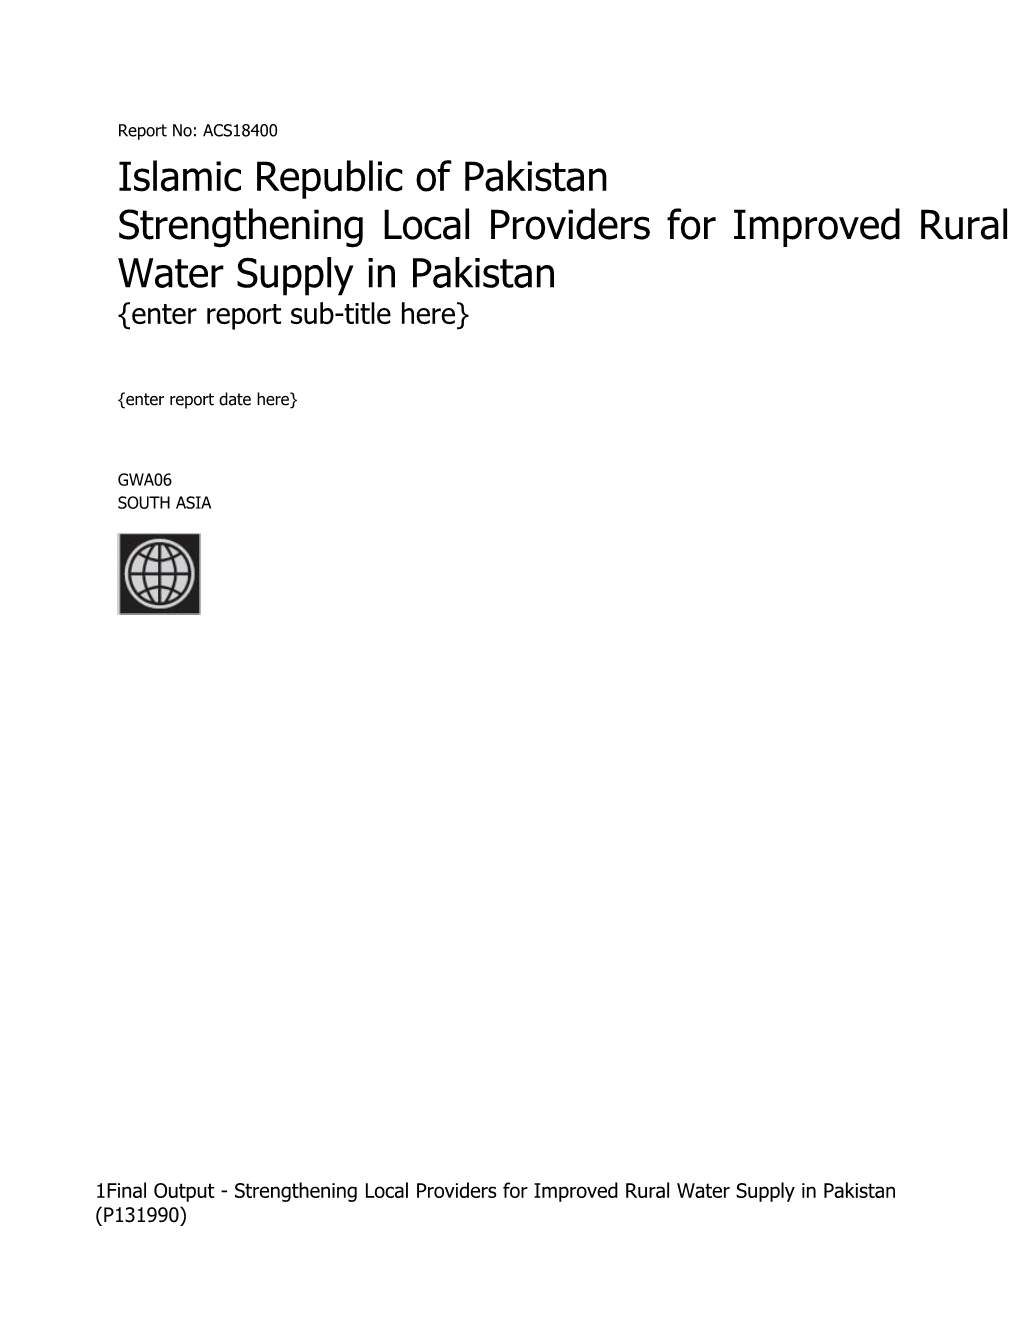 Strengthening Local Providers for Improved Rural Water Supply in Pakistan